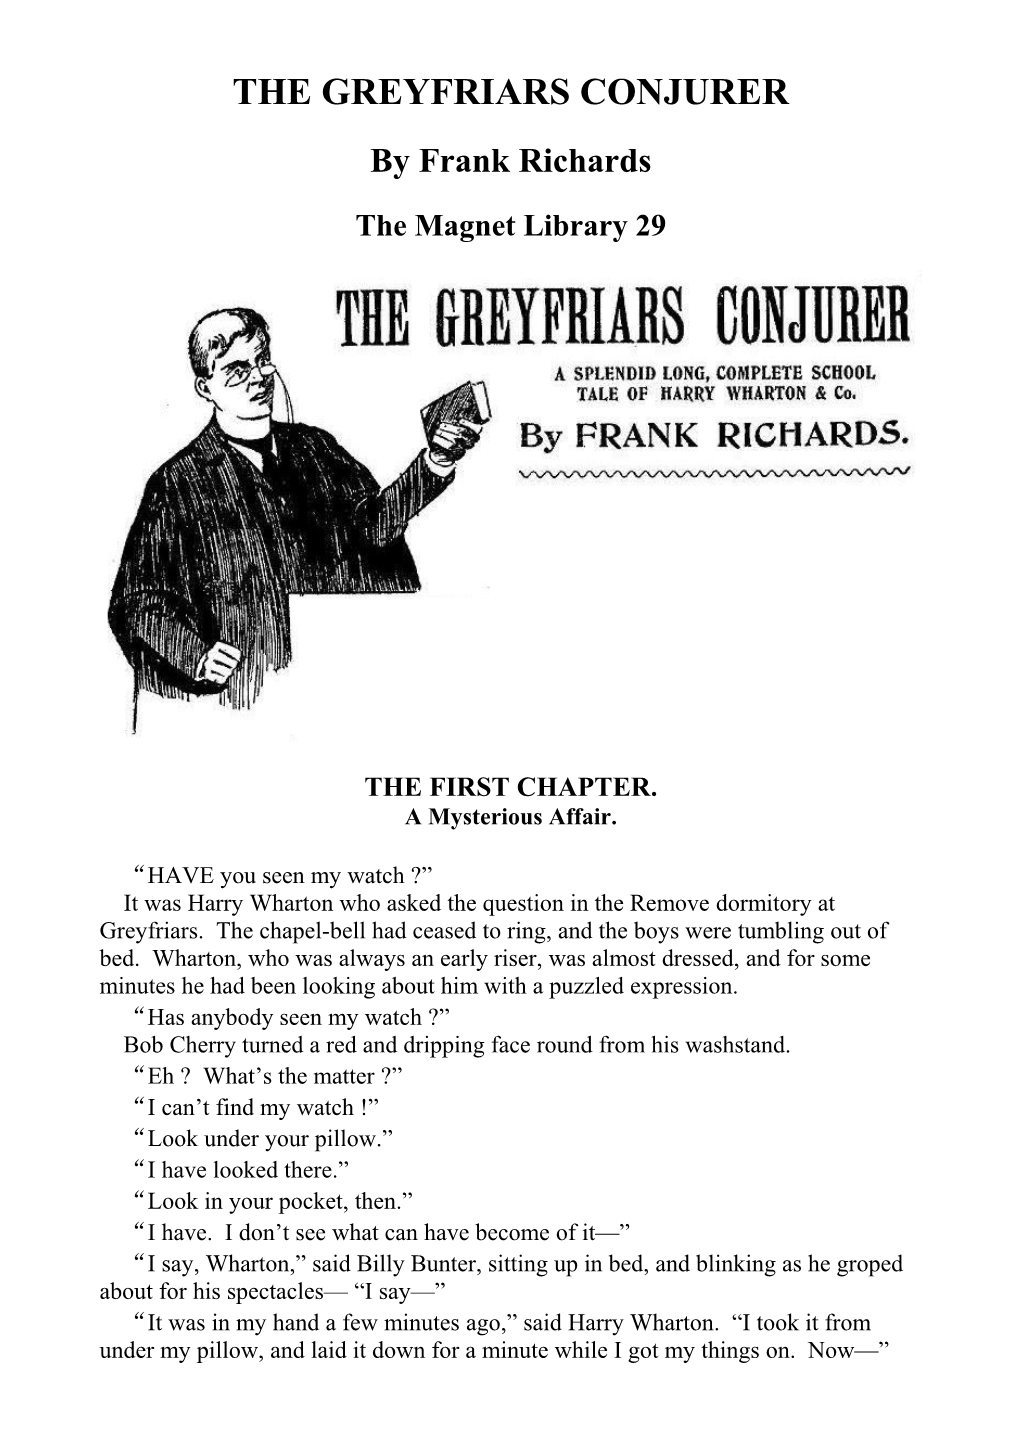 THE GREYFRIARS CONJURER by FRANK RICHARDS